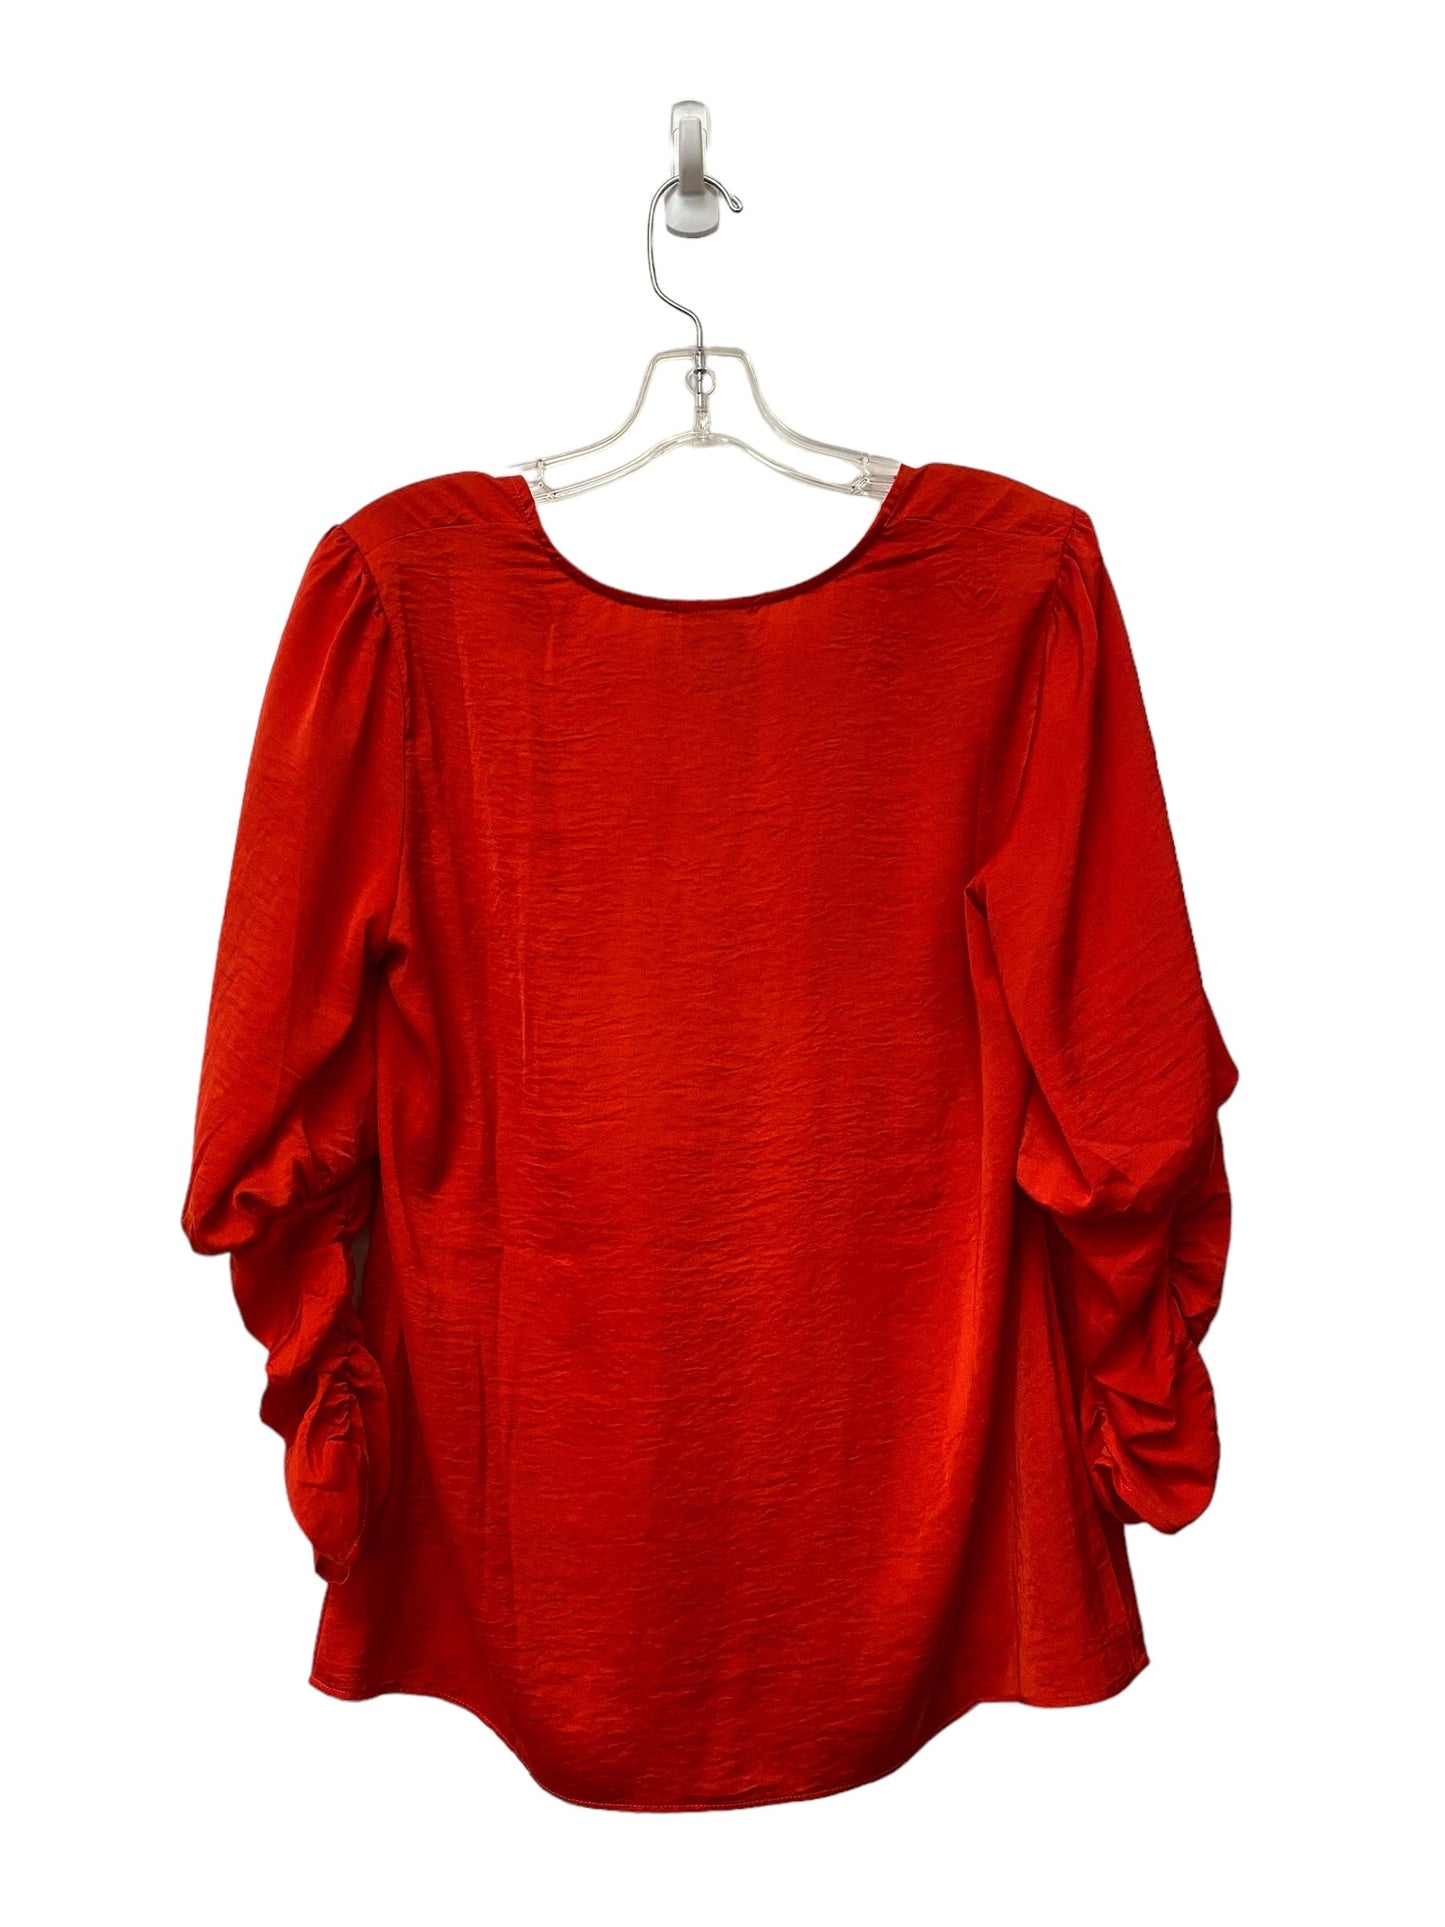 Red Top Long Sleeve Basic Cabi, Size M